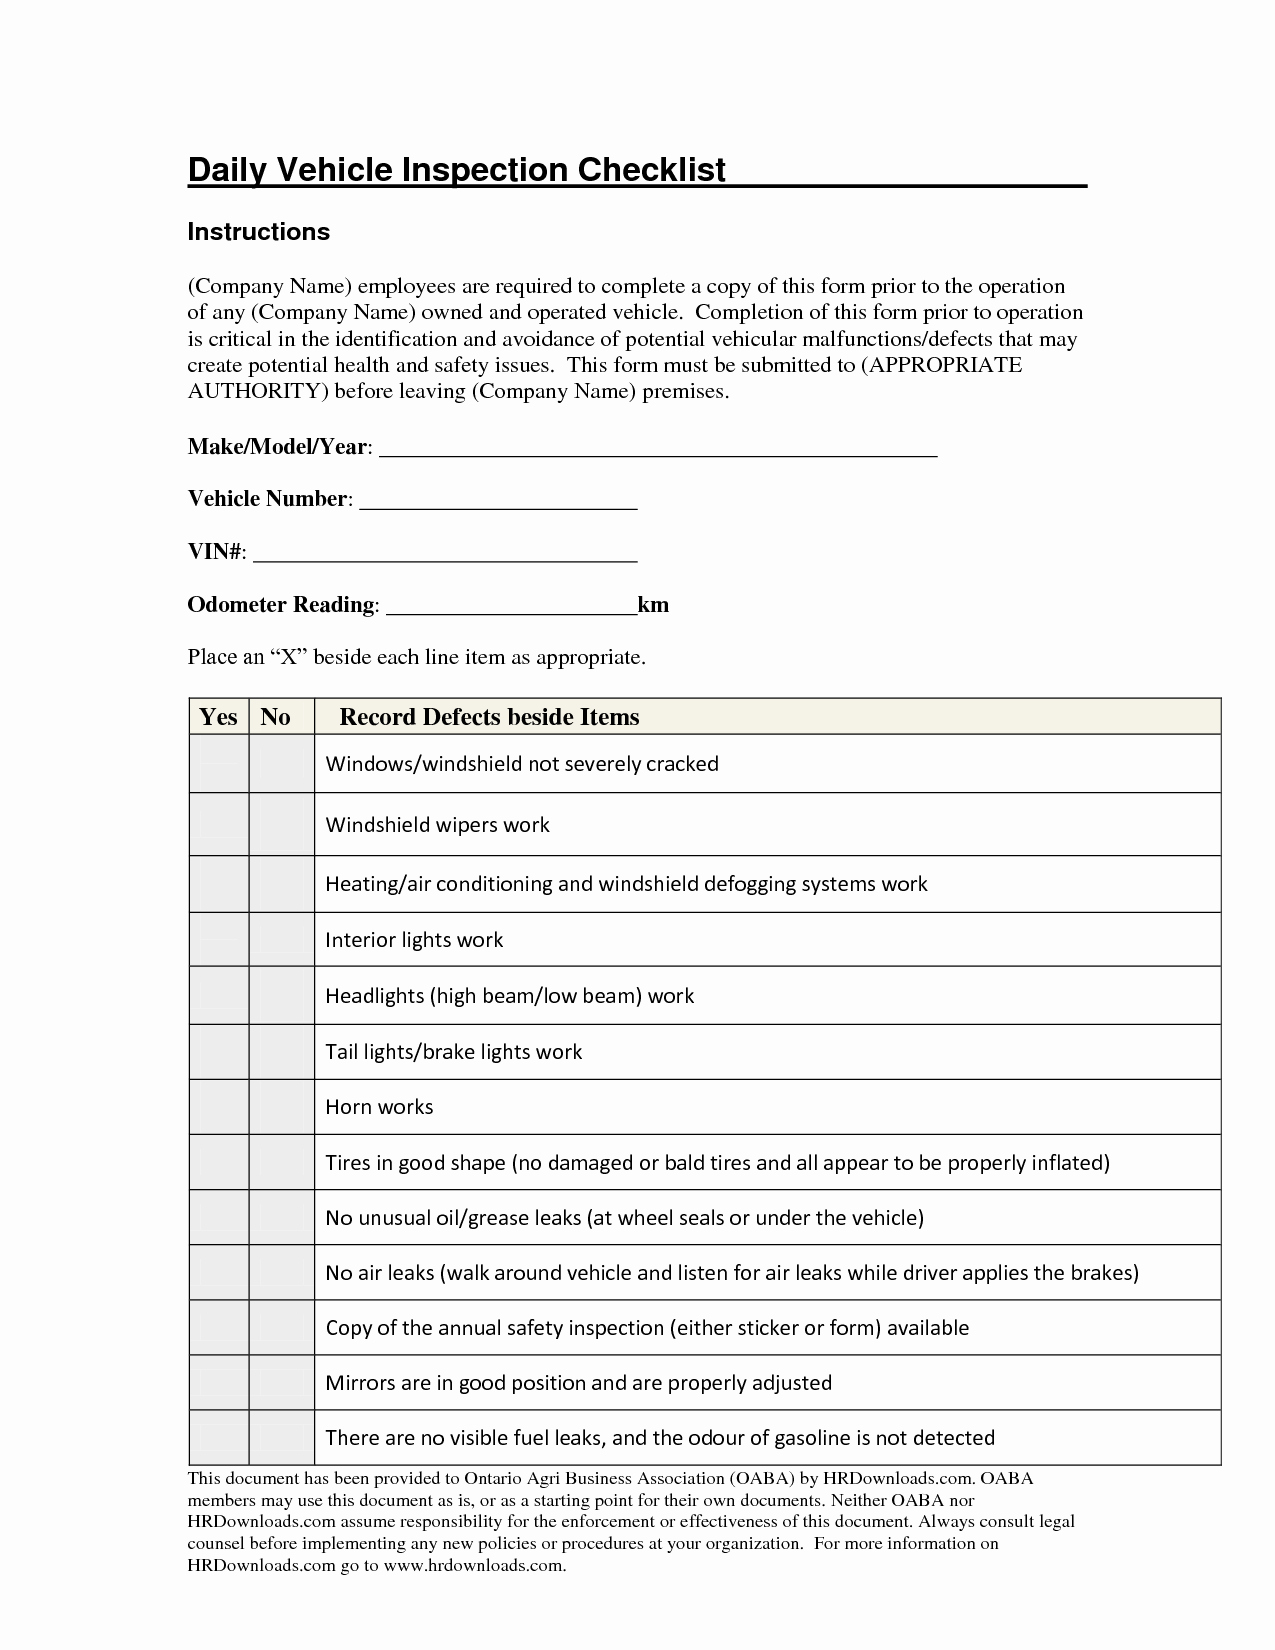 Vehicle Check Sheet Template Inspirational Daily Vehicle Inspection Checklist form Image Gallery